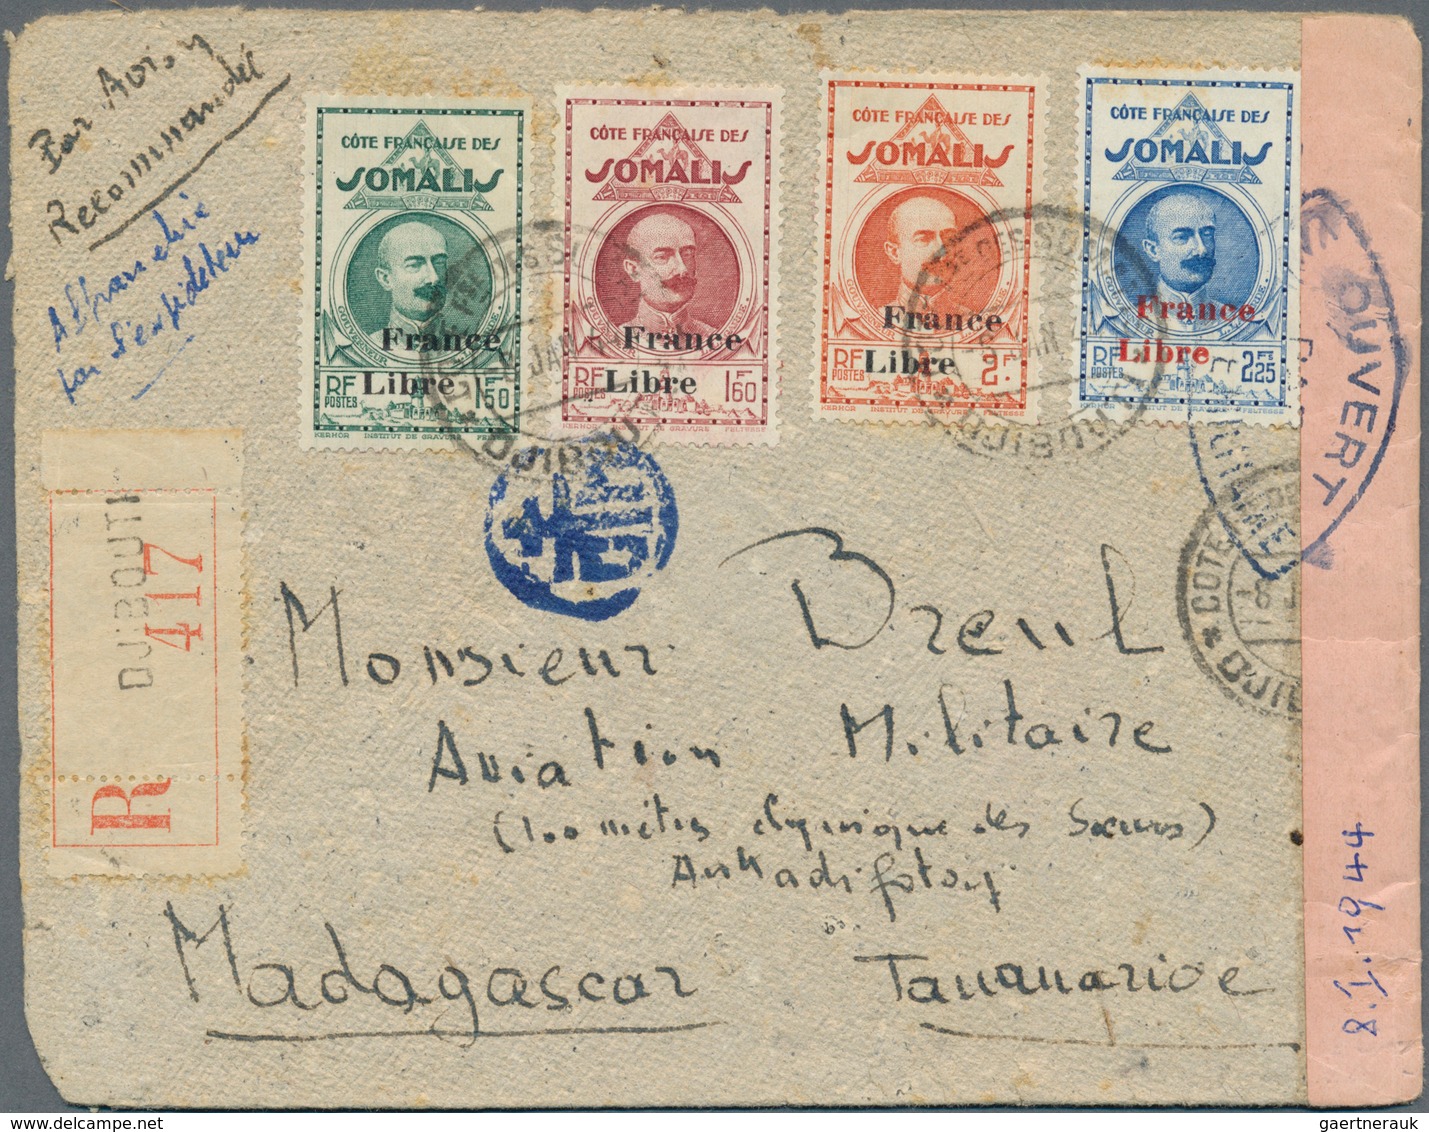 Französische Kolonien: 1924/2005, French colonies/French area, assortment of apprx. 100 covers/cards